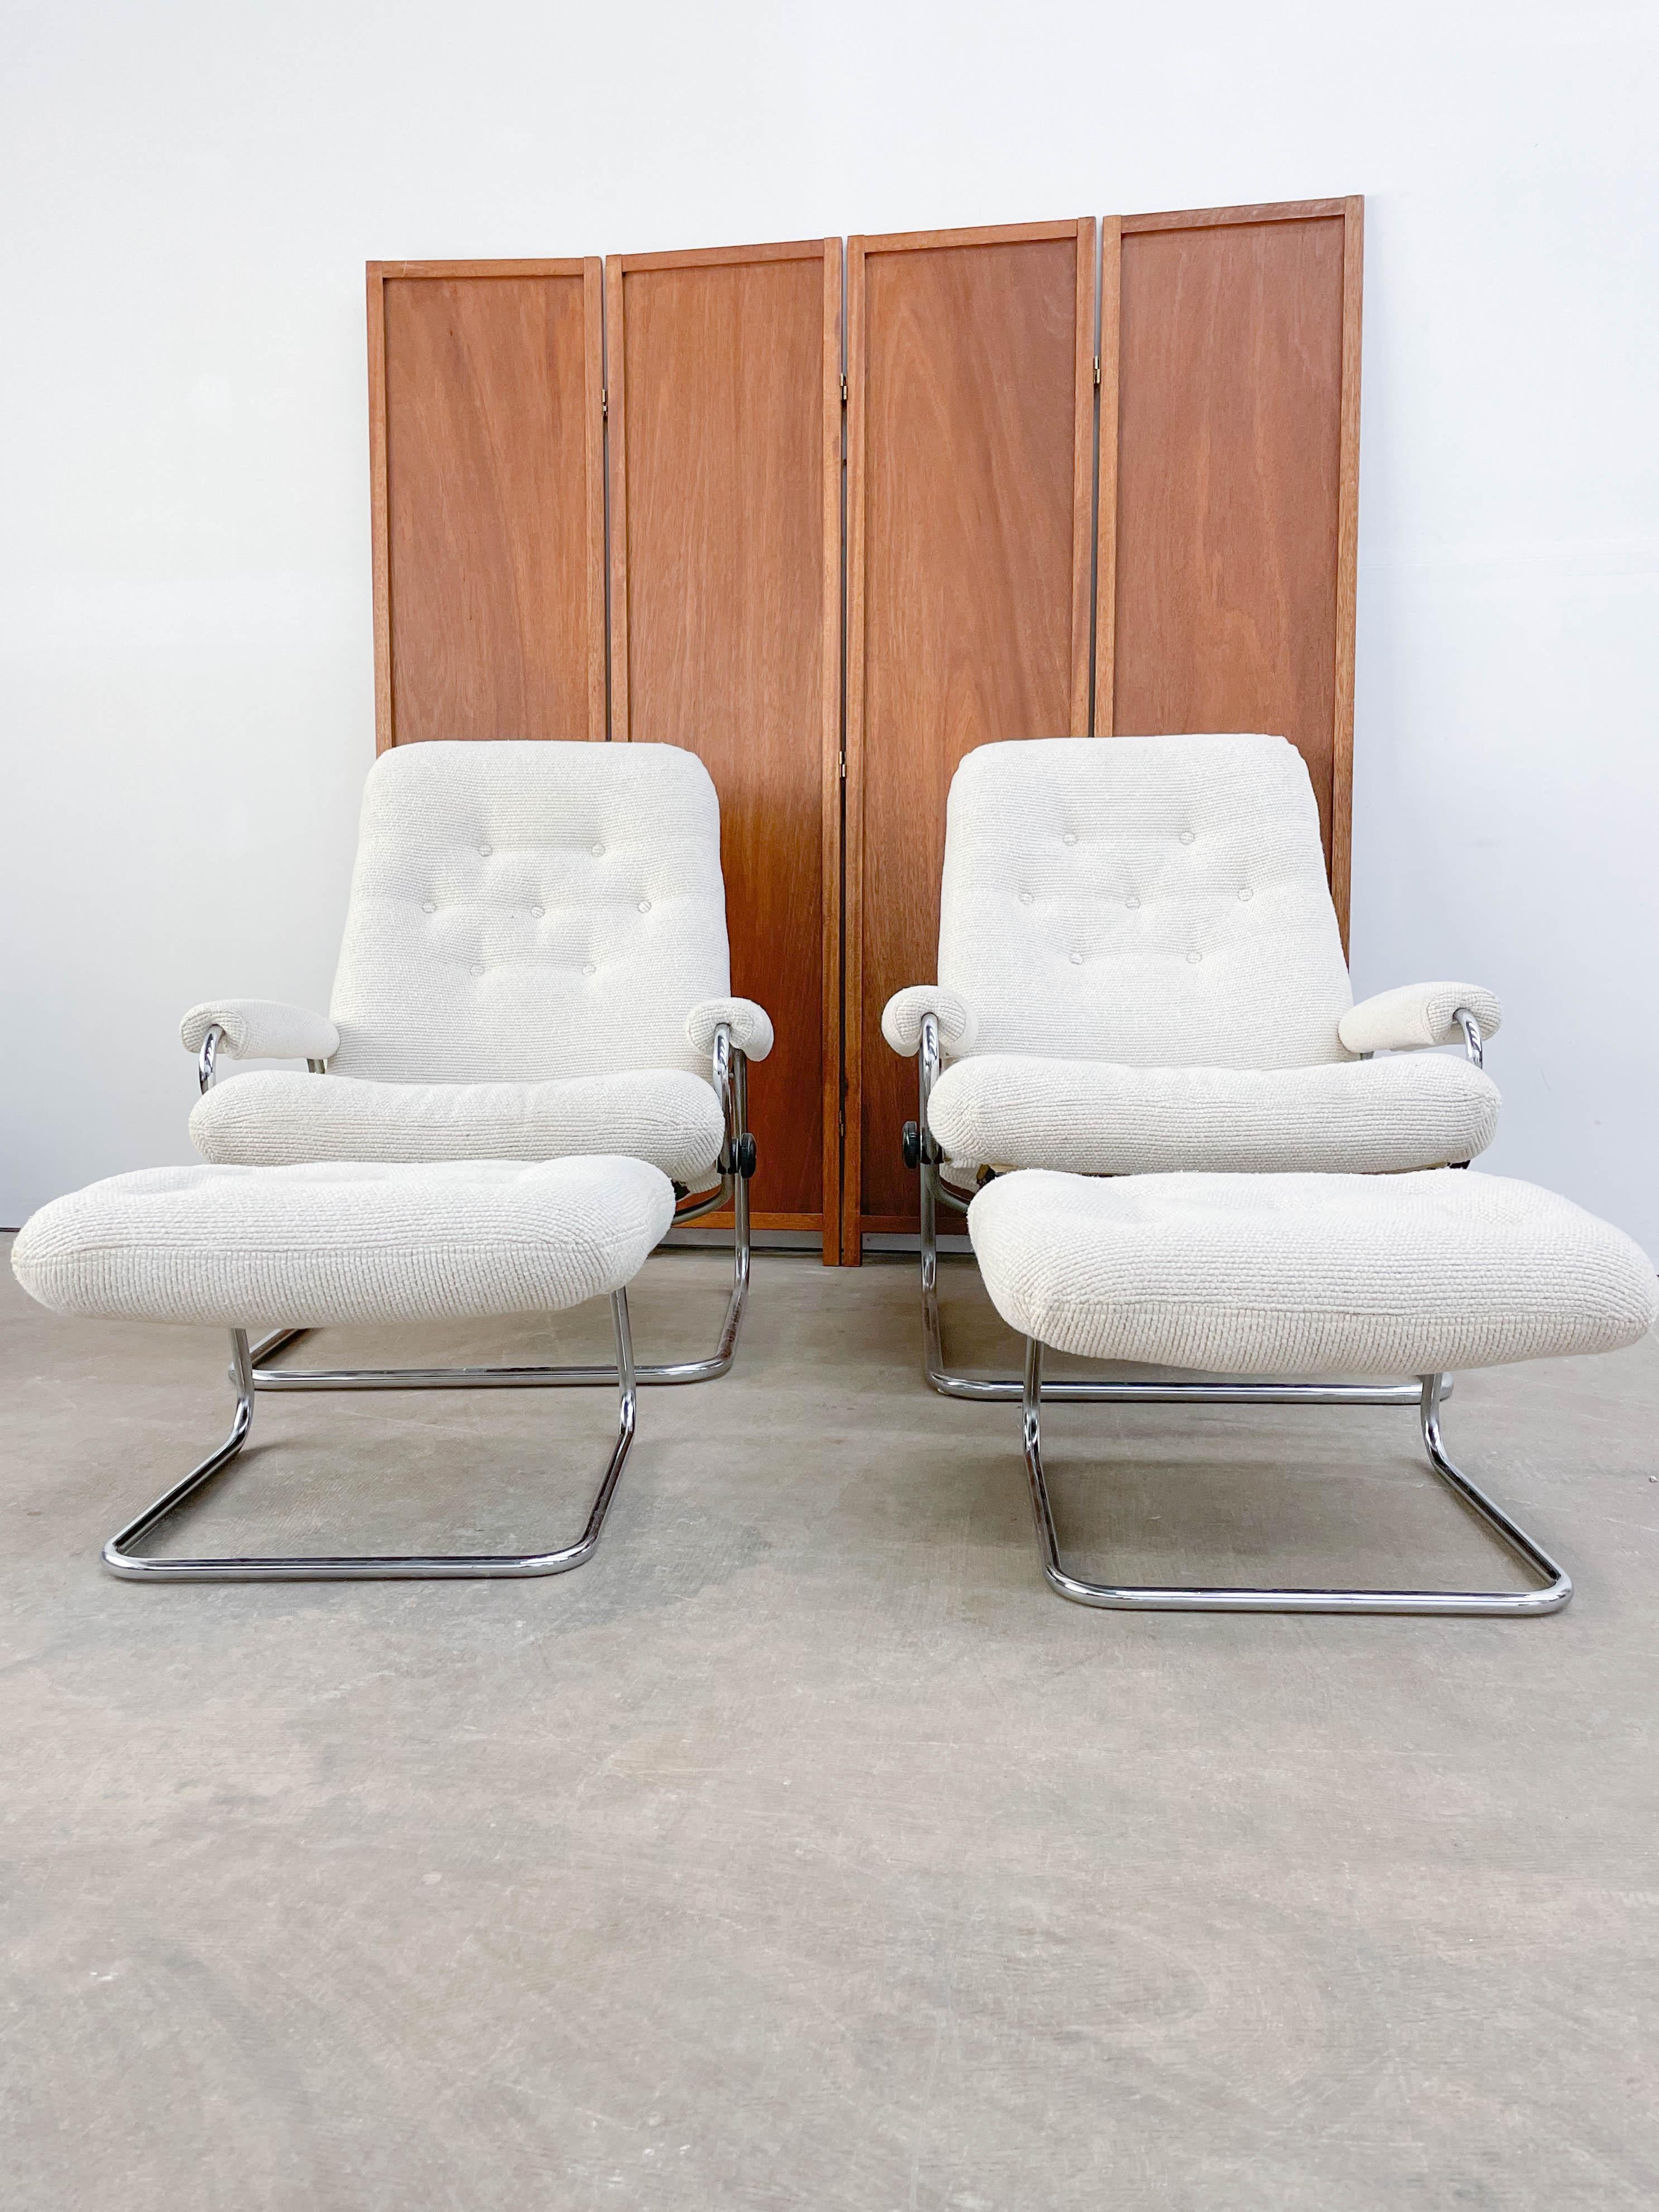 This is a very stylish pair of 1970s recliners on cantilever bases in a boucle type fabric. These are beautiful examples of Scandinavian mid-century modern design, but they also offer contemporary comfort and a bang-on-trend upholstery. Each chair